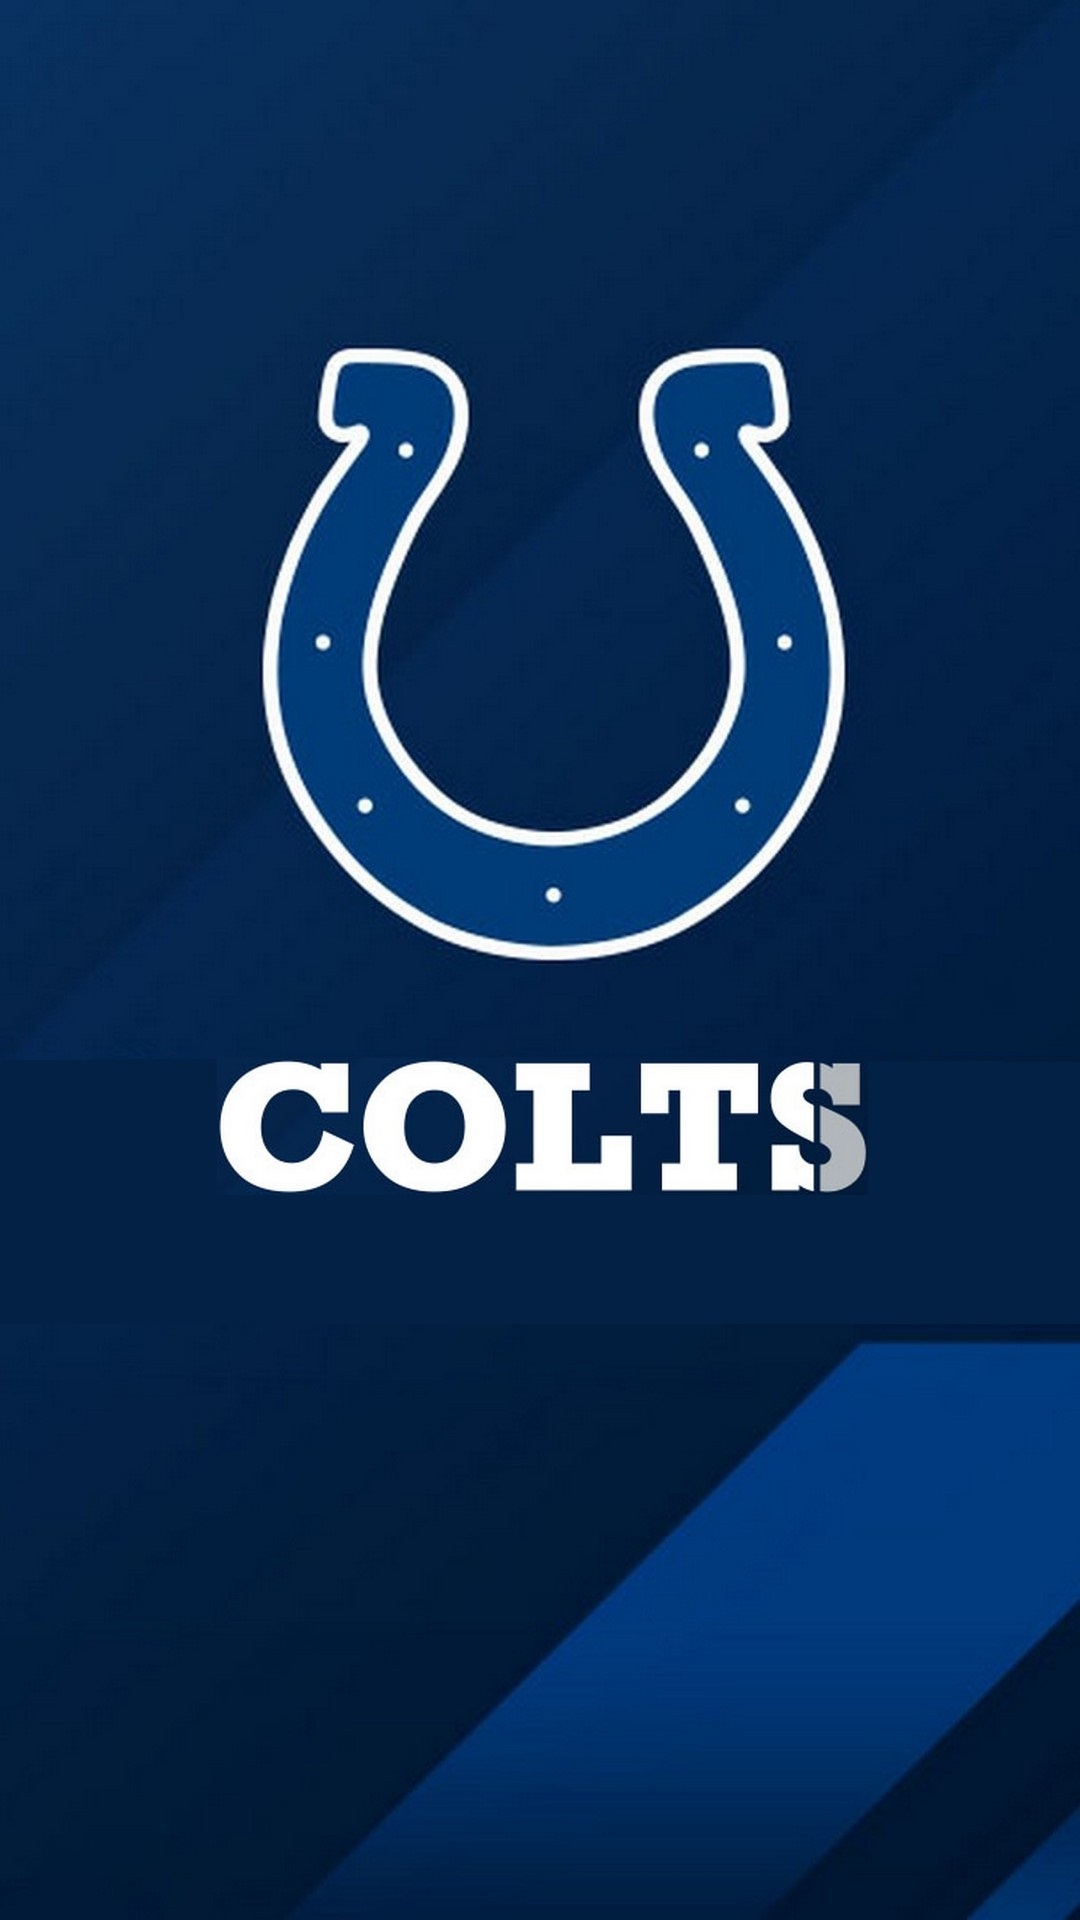 Indianapolis Colts iPhone Wallpaper Nfl Football